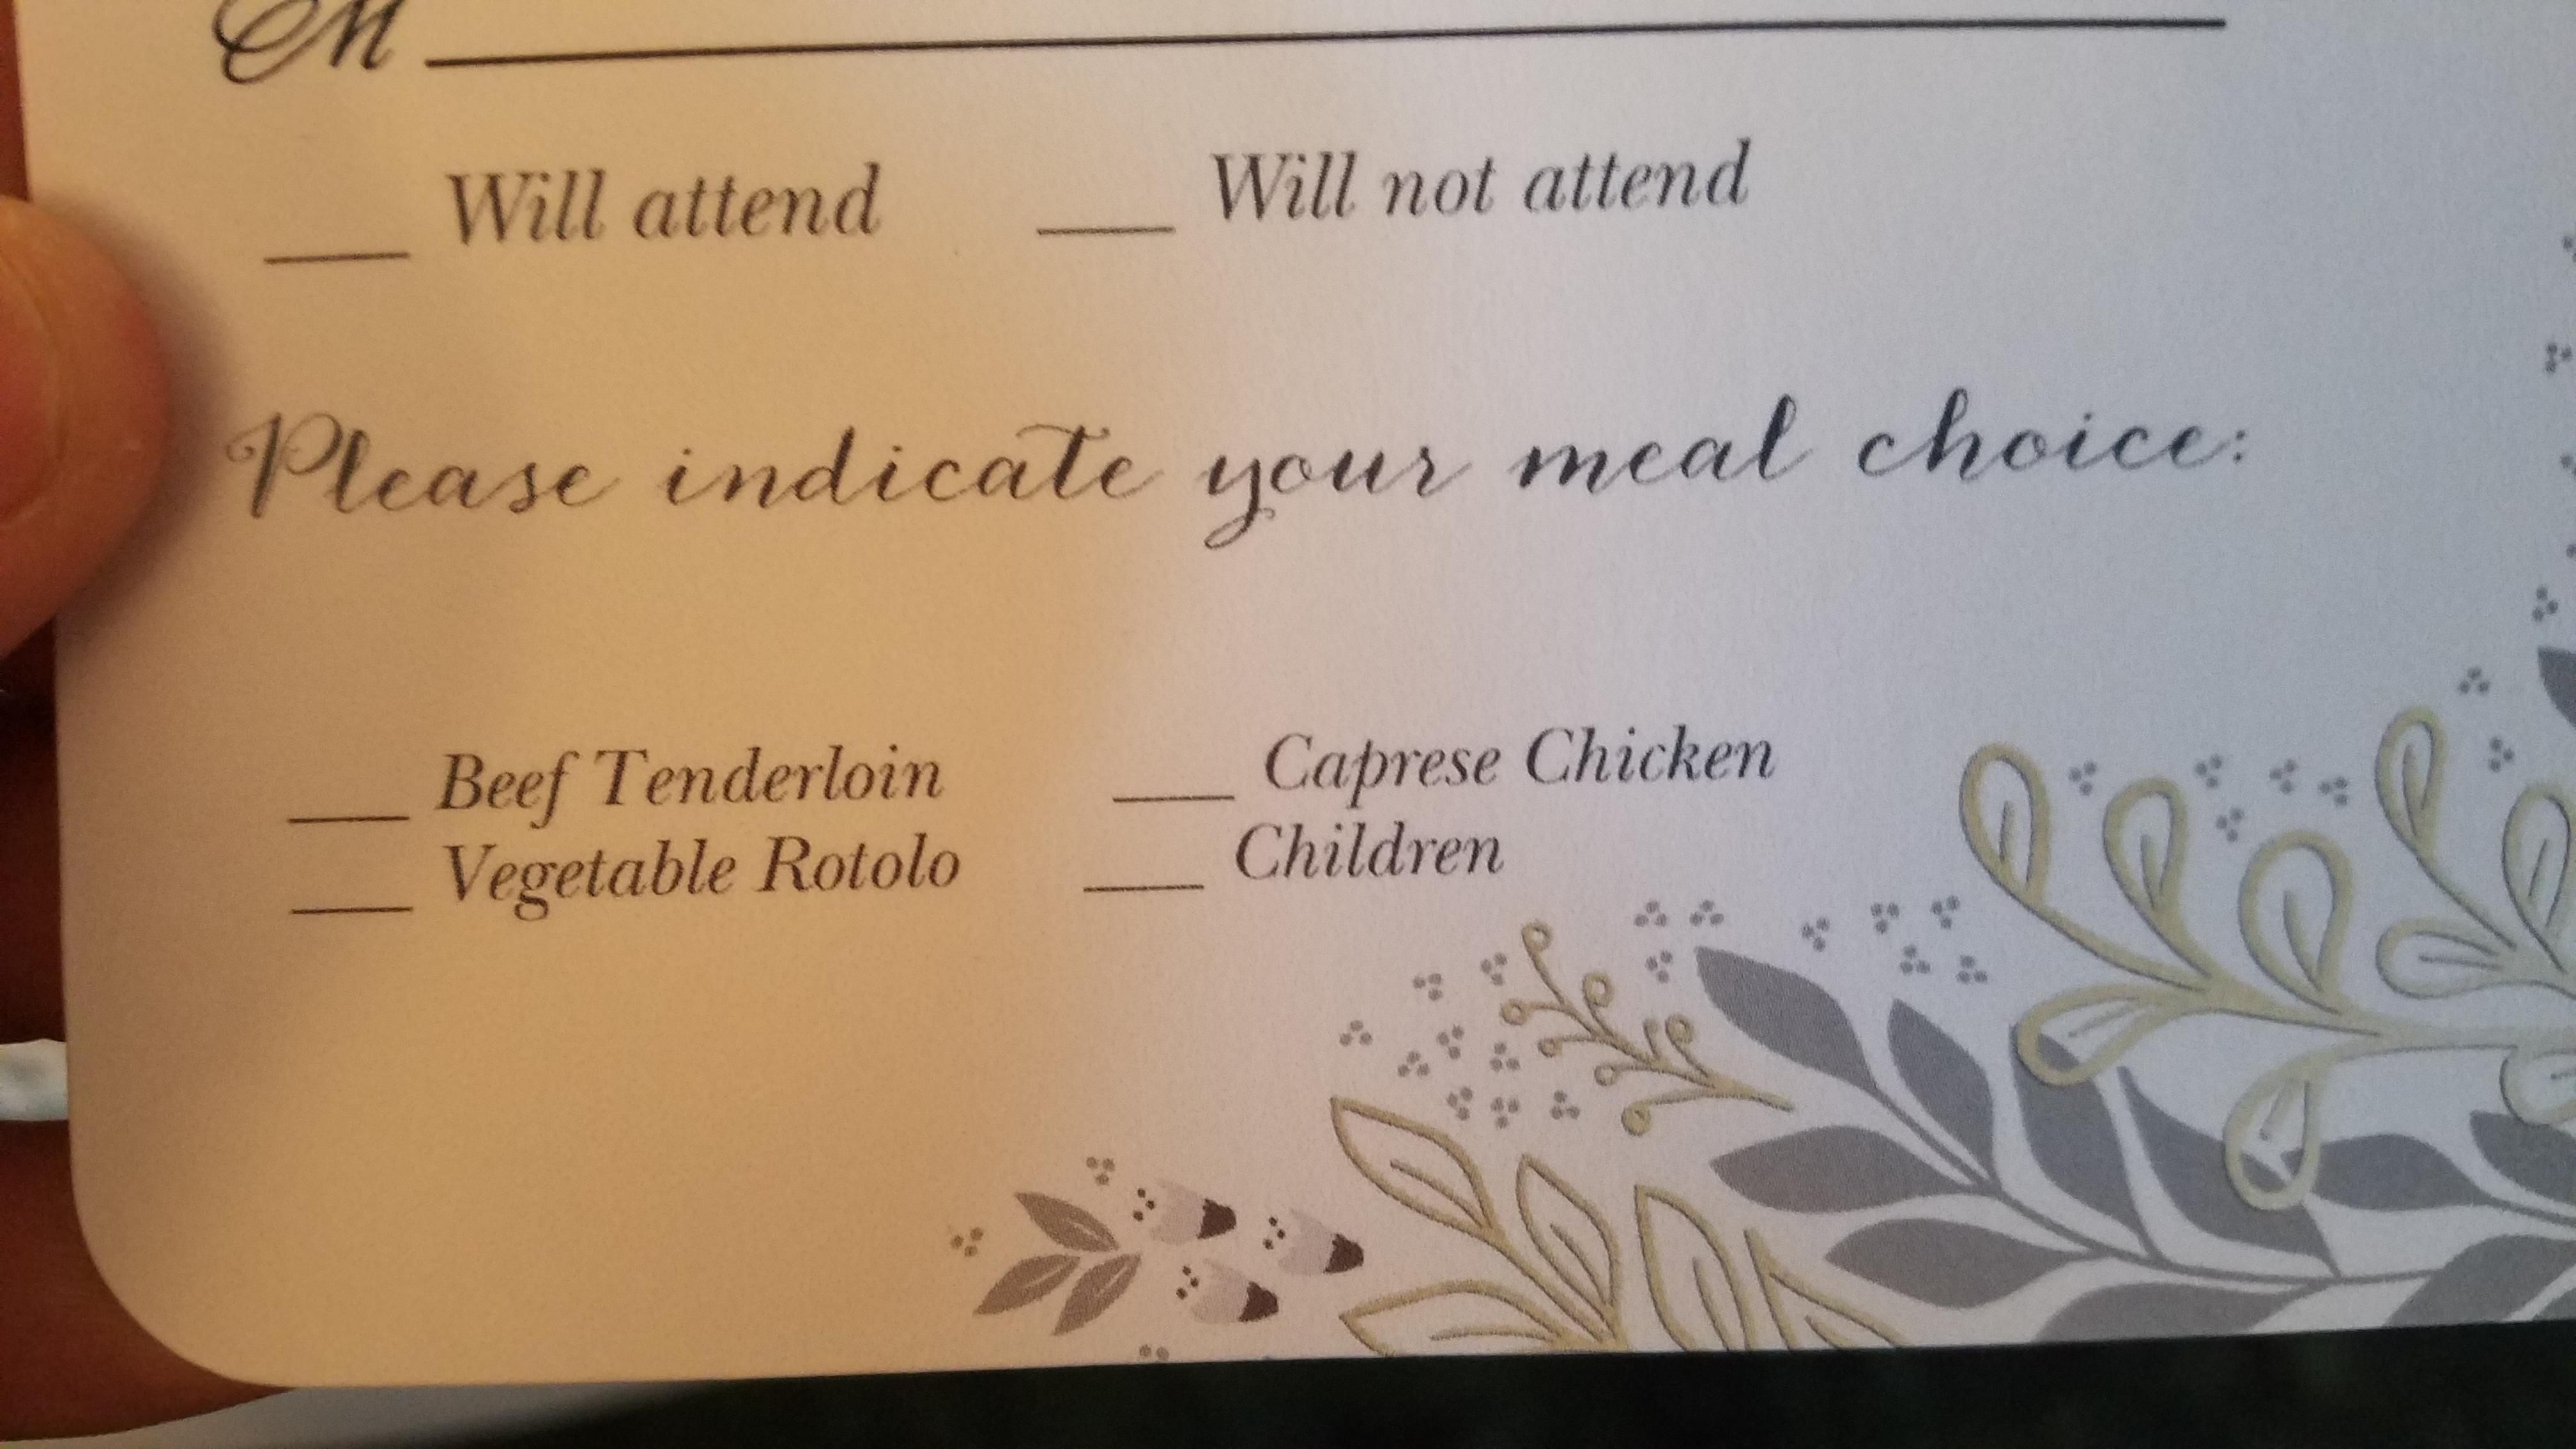 An Interesting Menu for my Family's wedding